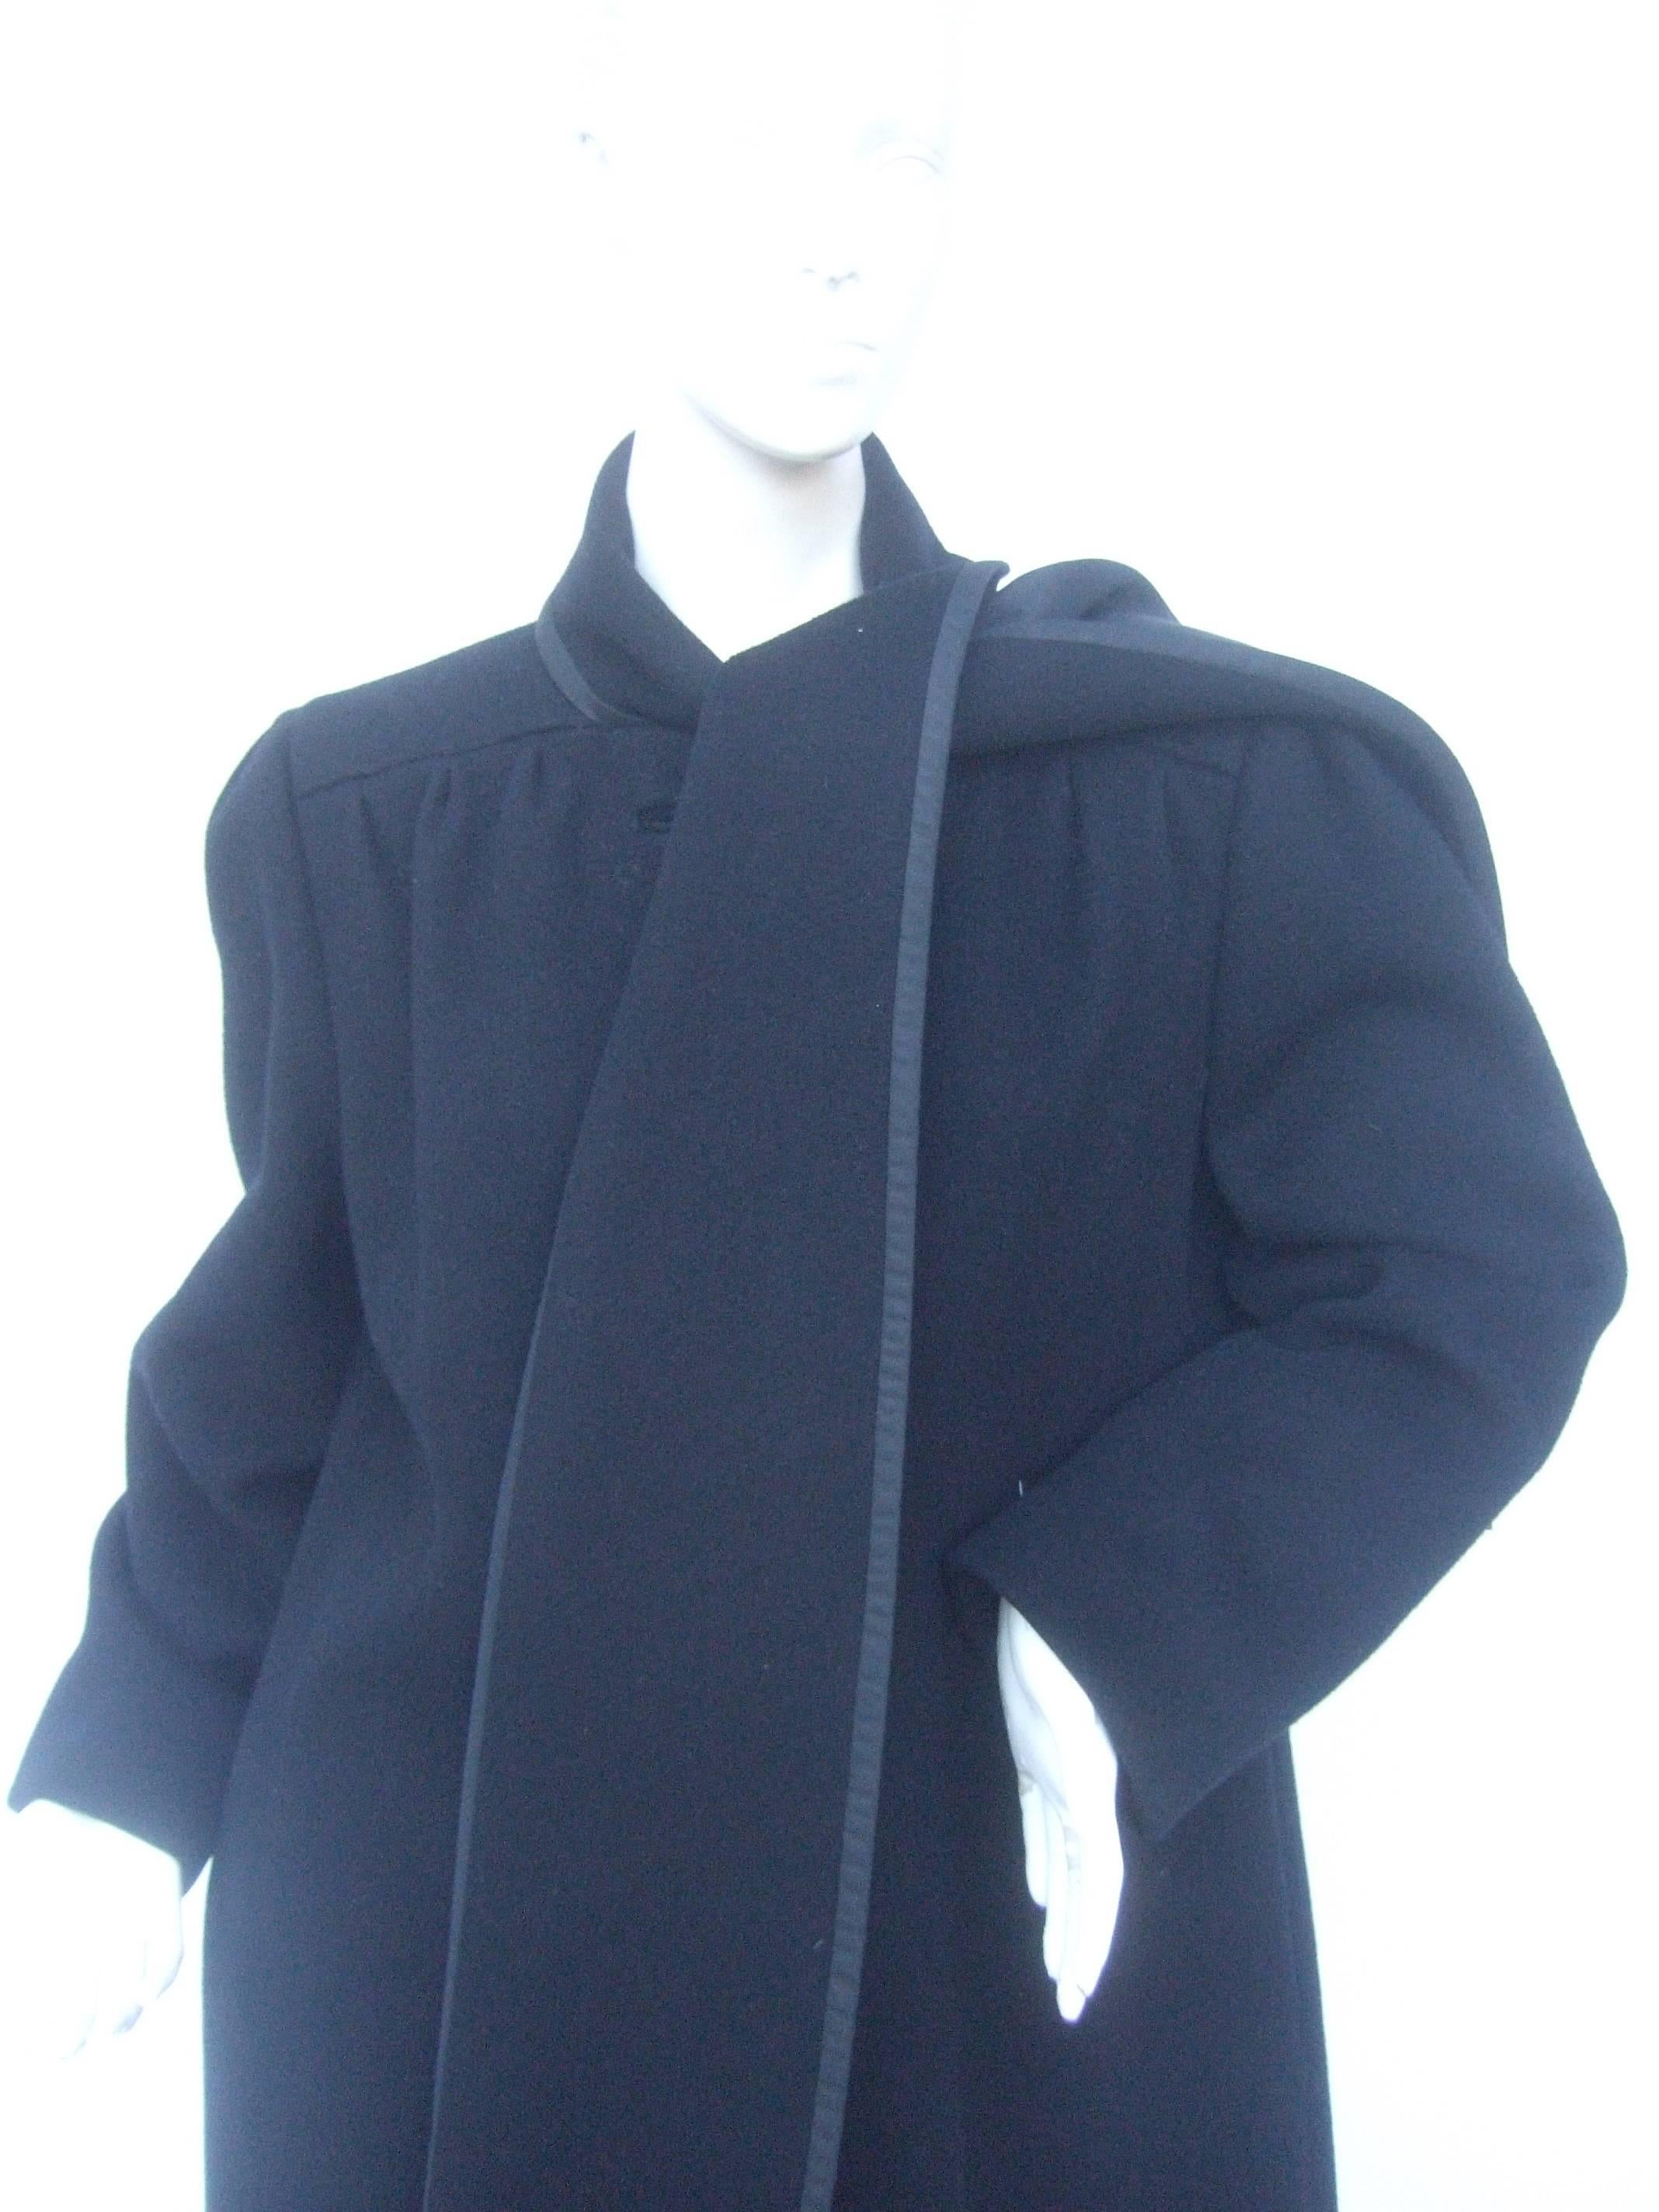 Pauline Trigere Unique Black Wool Winter Coat with Built in Scarf ca 1970s 1